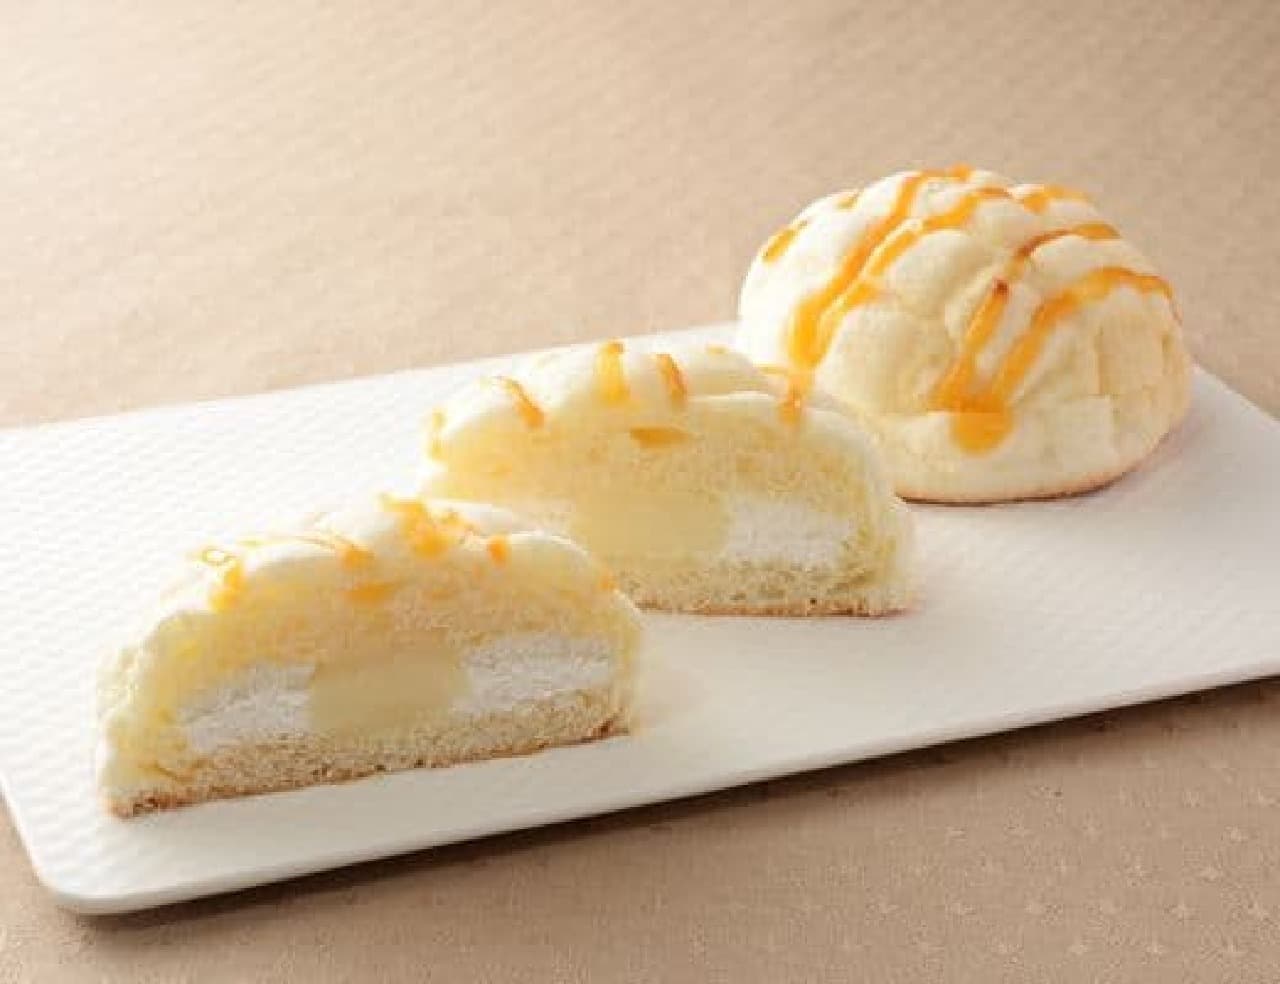 LAWSON "Cheese Melon Pan with Whipped & Cheese Cream